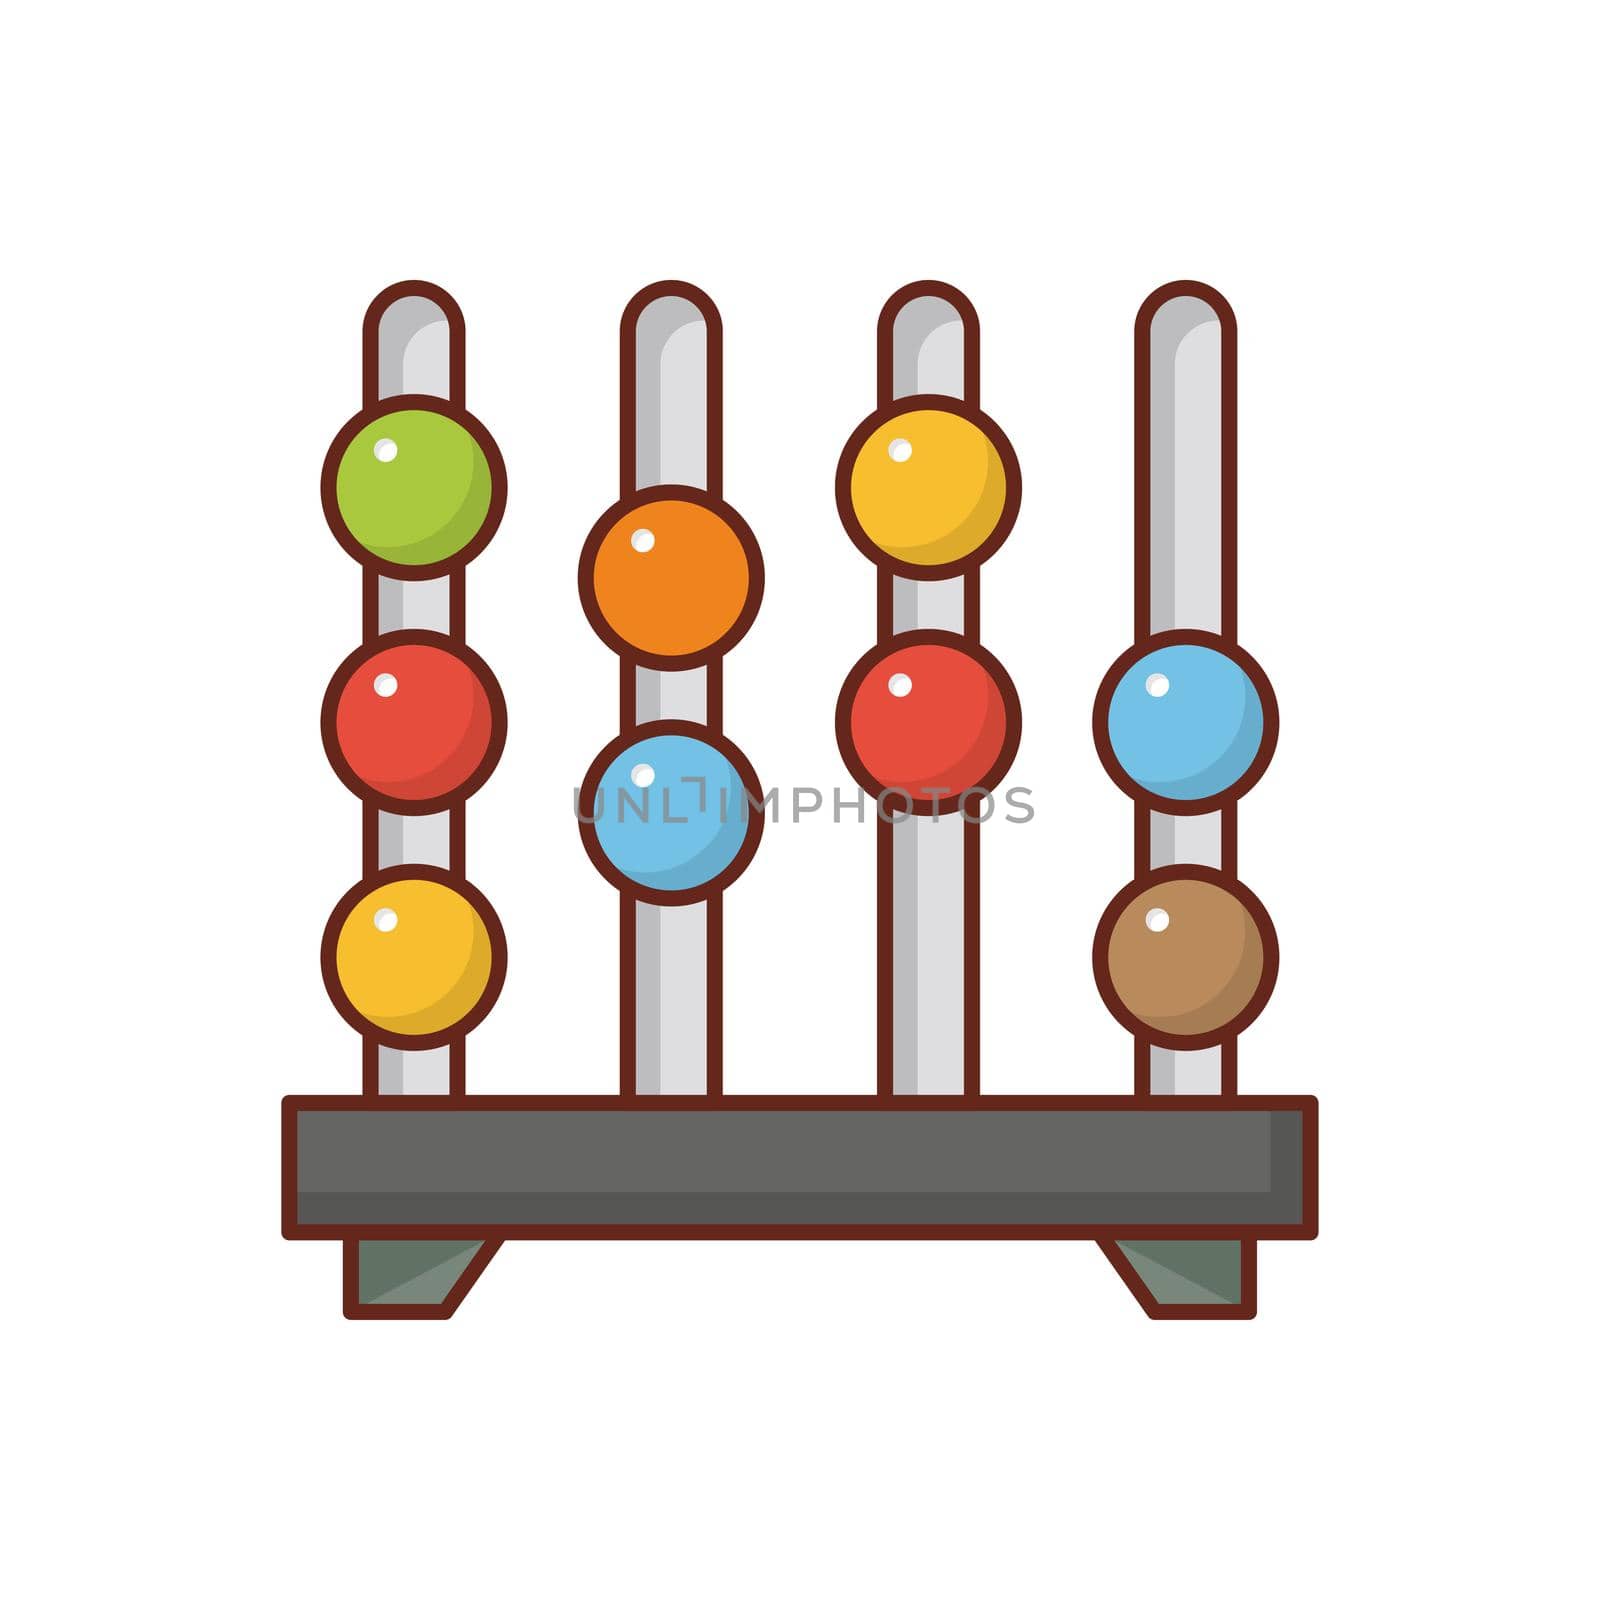 abacus by FlaticonsDesign